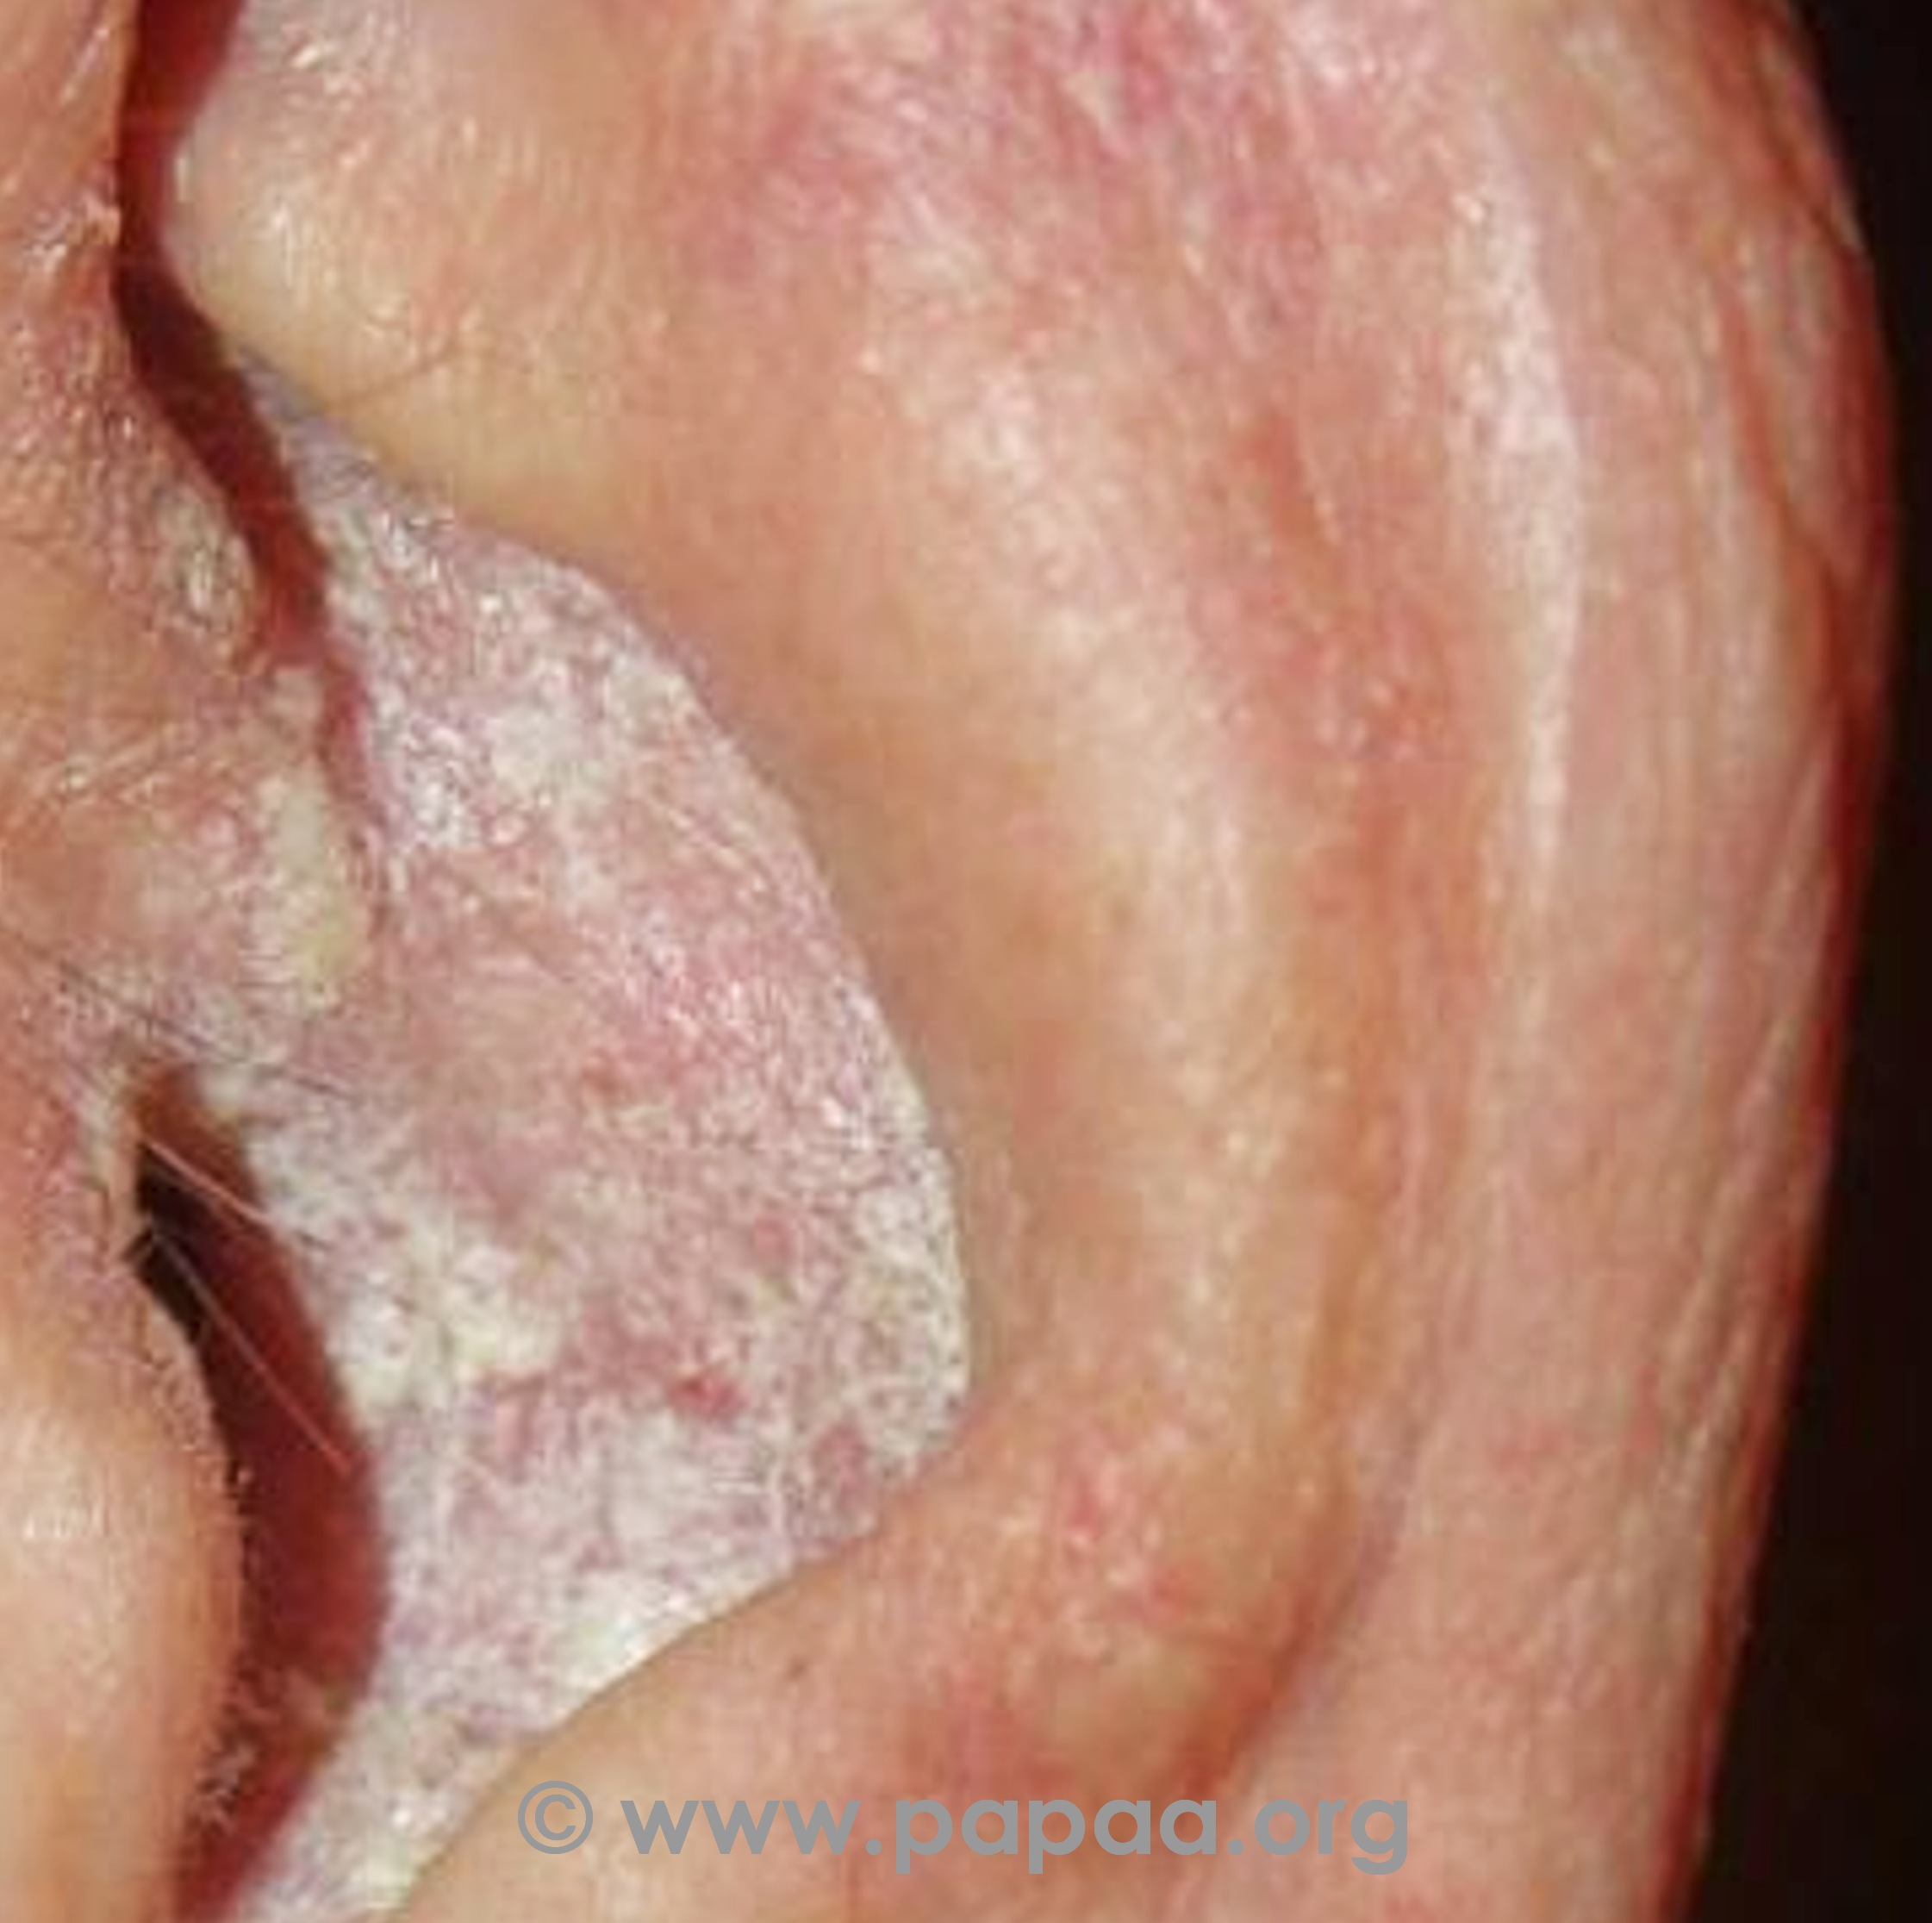 psoriasis in the ear canal